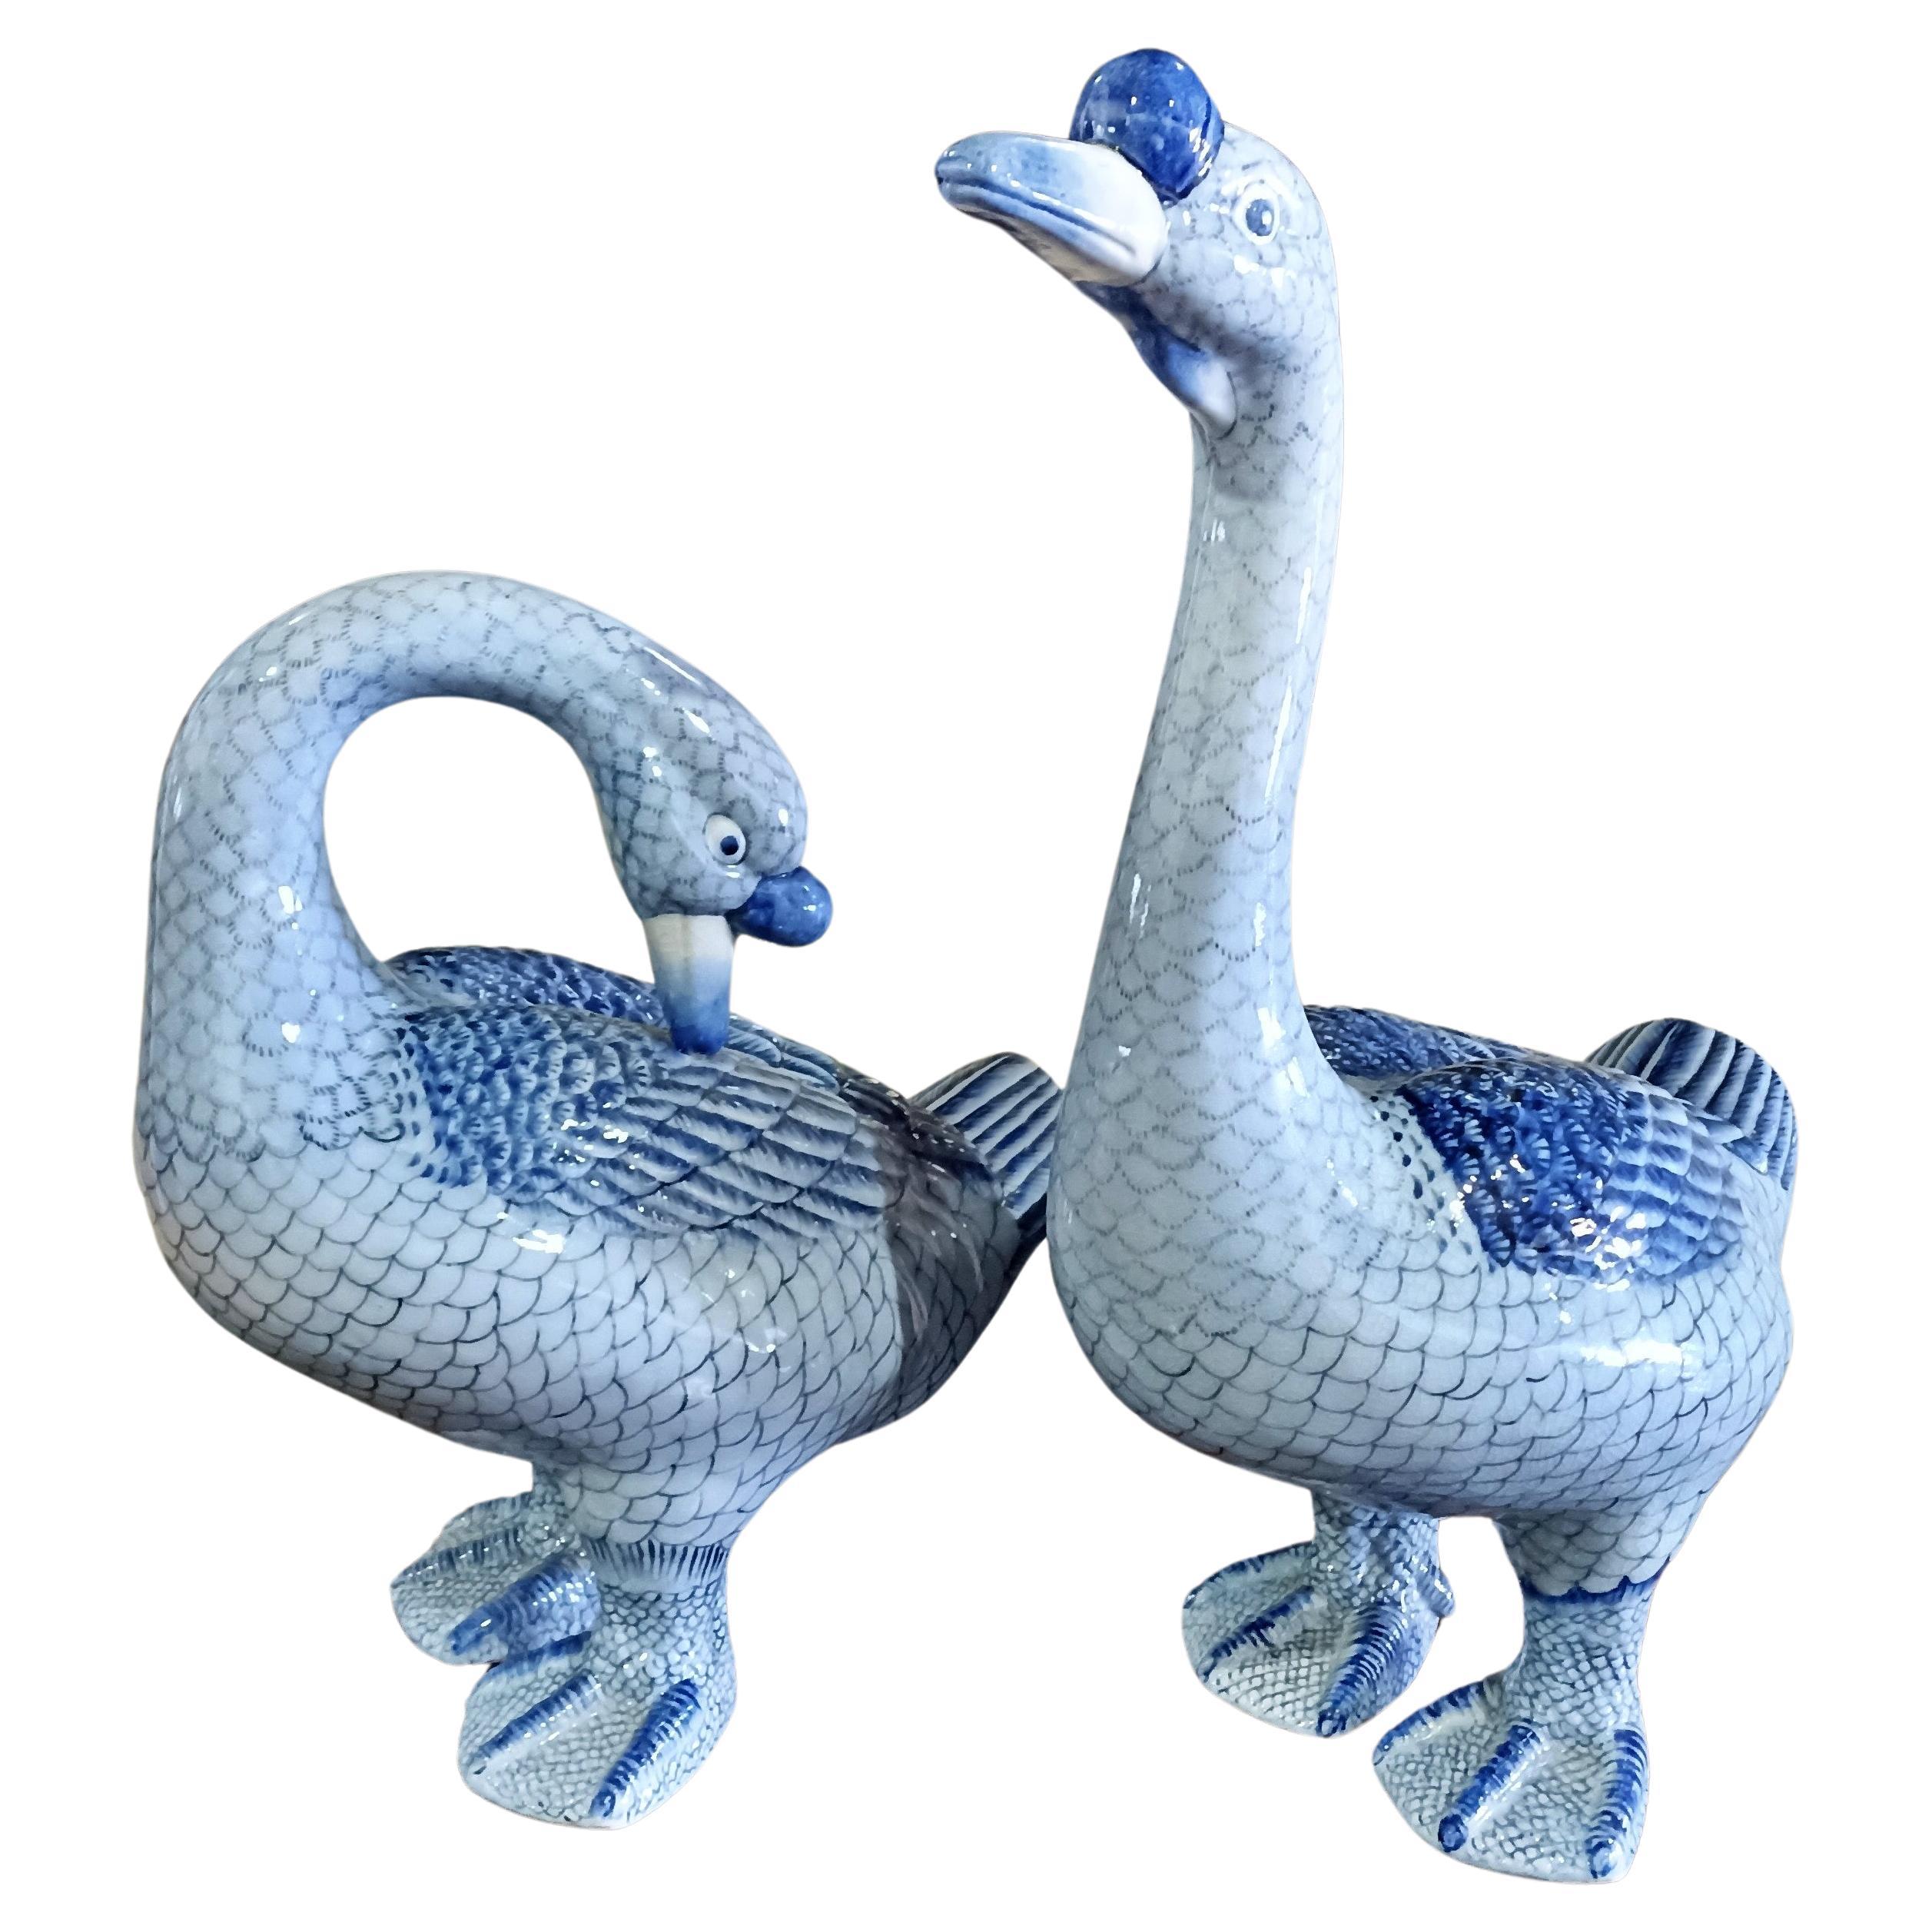 PAIR OF GEESE  On Chinese Ceramics, end 19th Century/beginning 20th